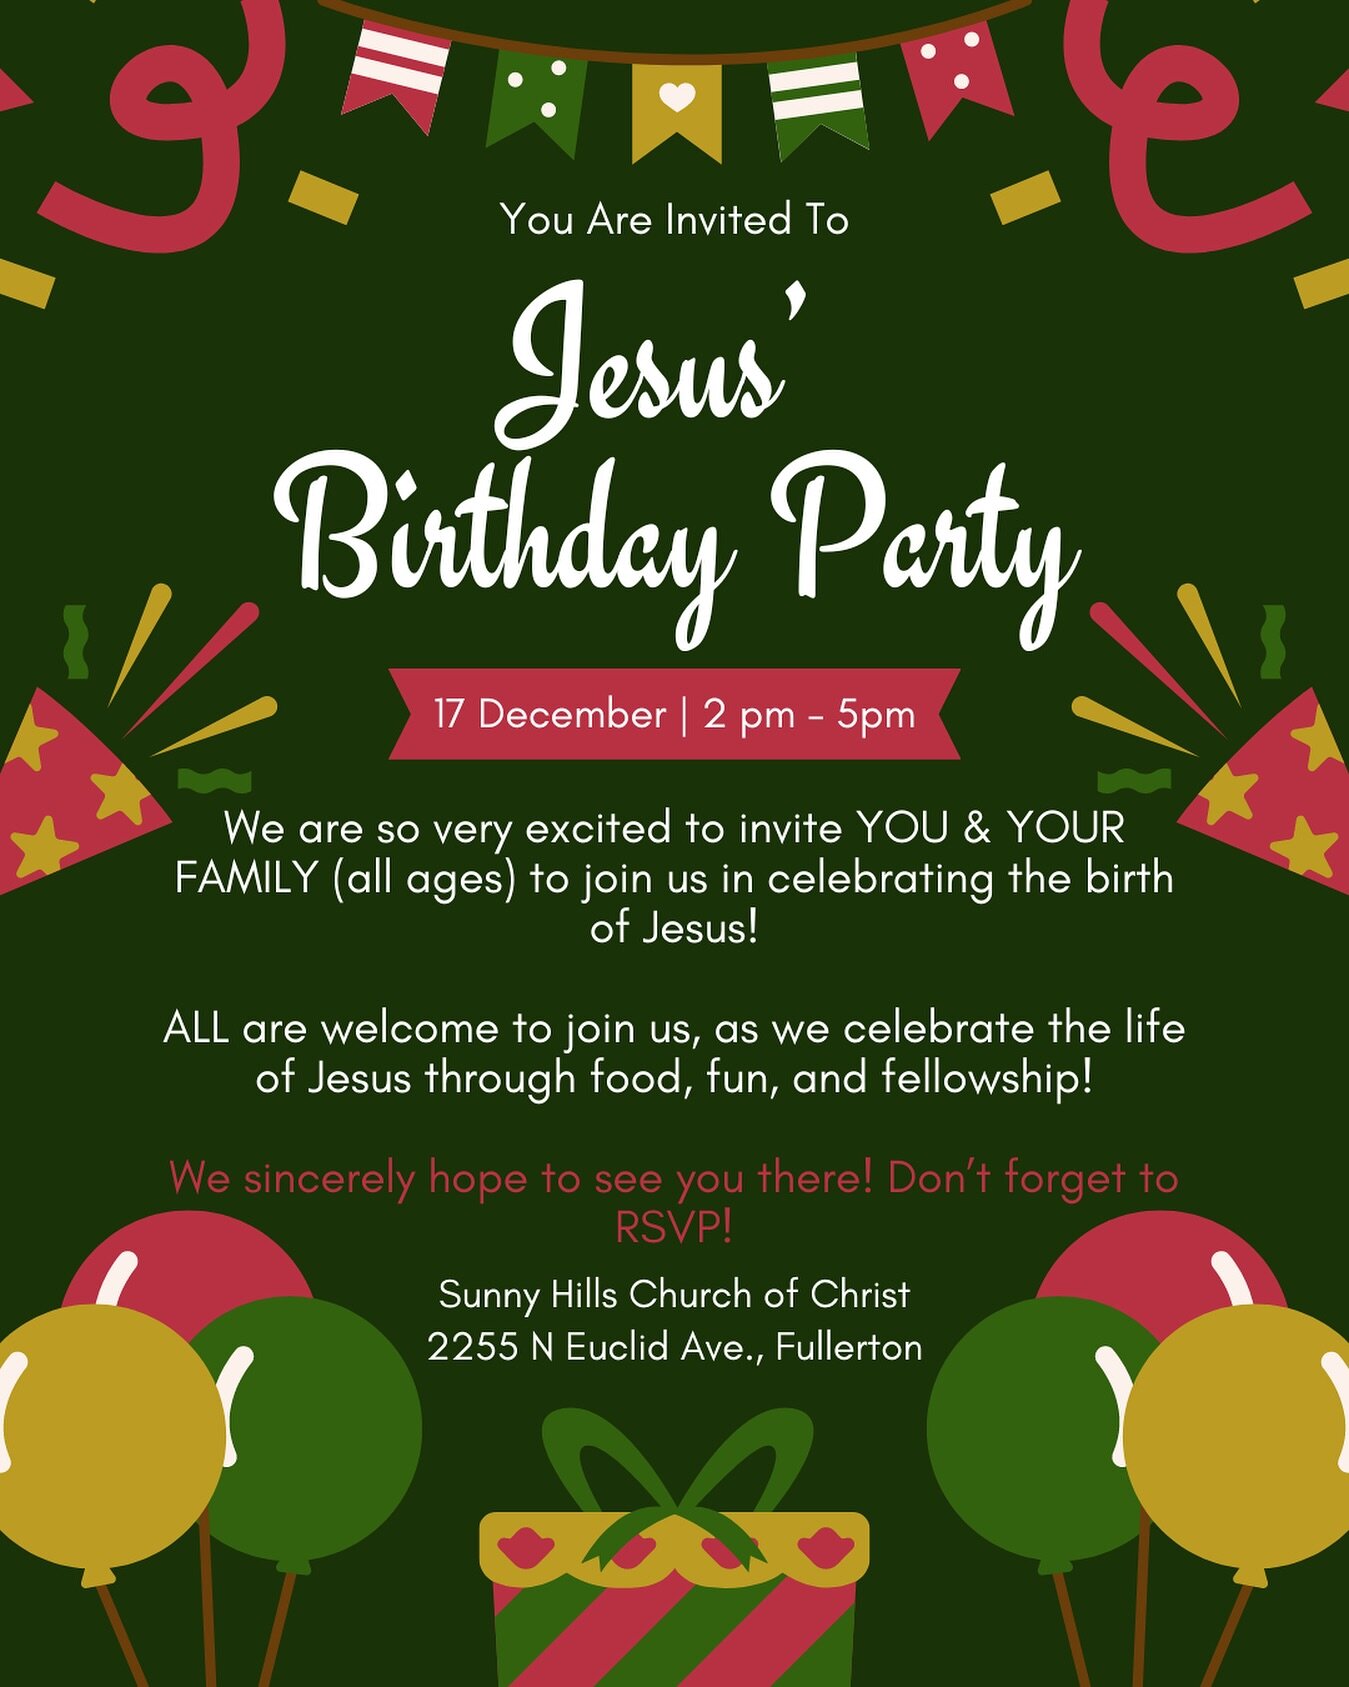 𝐉𝐞𝐬𝐮𝐬&rsquo; 𝐁𝐢𝐫𝐭𝐡𝐝𝐚𝐲 𝐏𝐚𝐫𝐭𝐲

YOU are invited to Jesus' Birthday Party! 

We are so very excited to invite YOU &amp; YOUR FAMILY (all ages) to join us in celebrating the birth of Jesus! ALL are welcome to join us, as we celebrate the